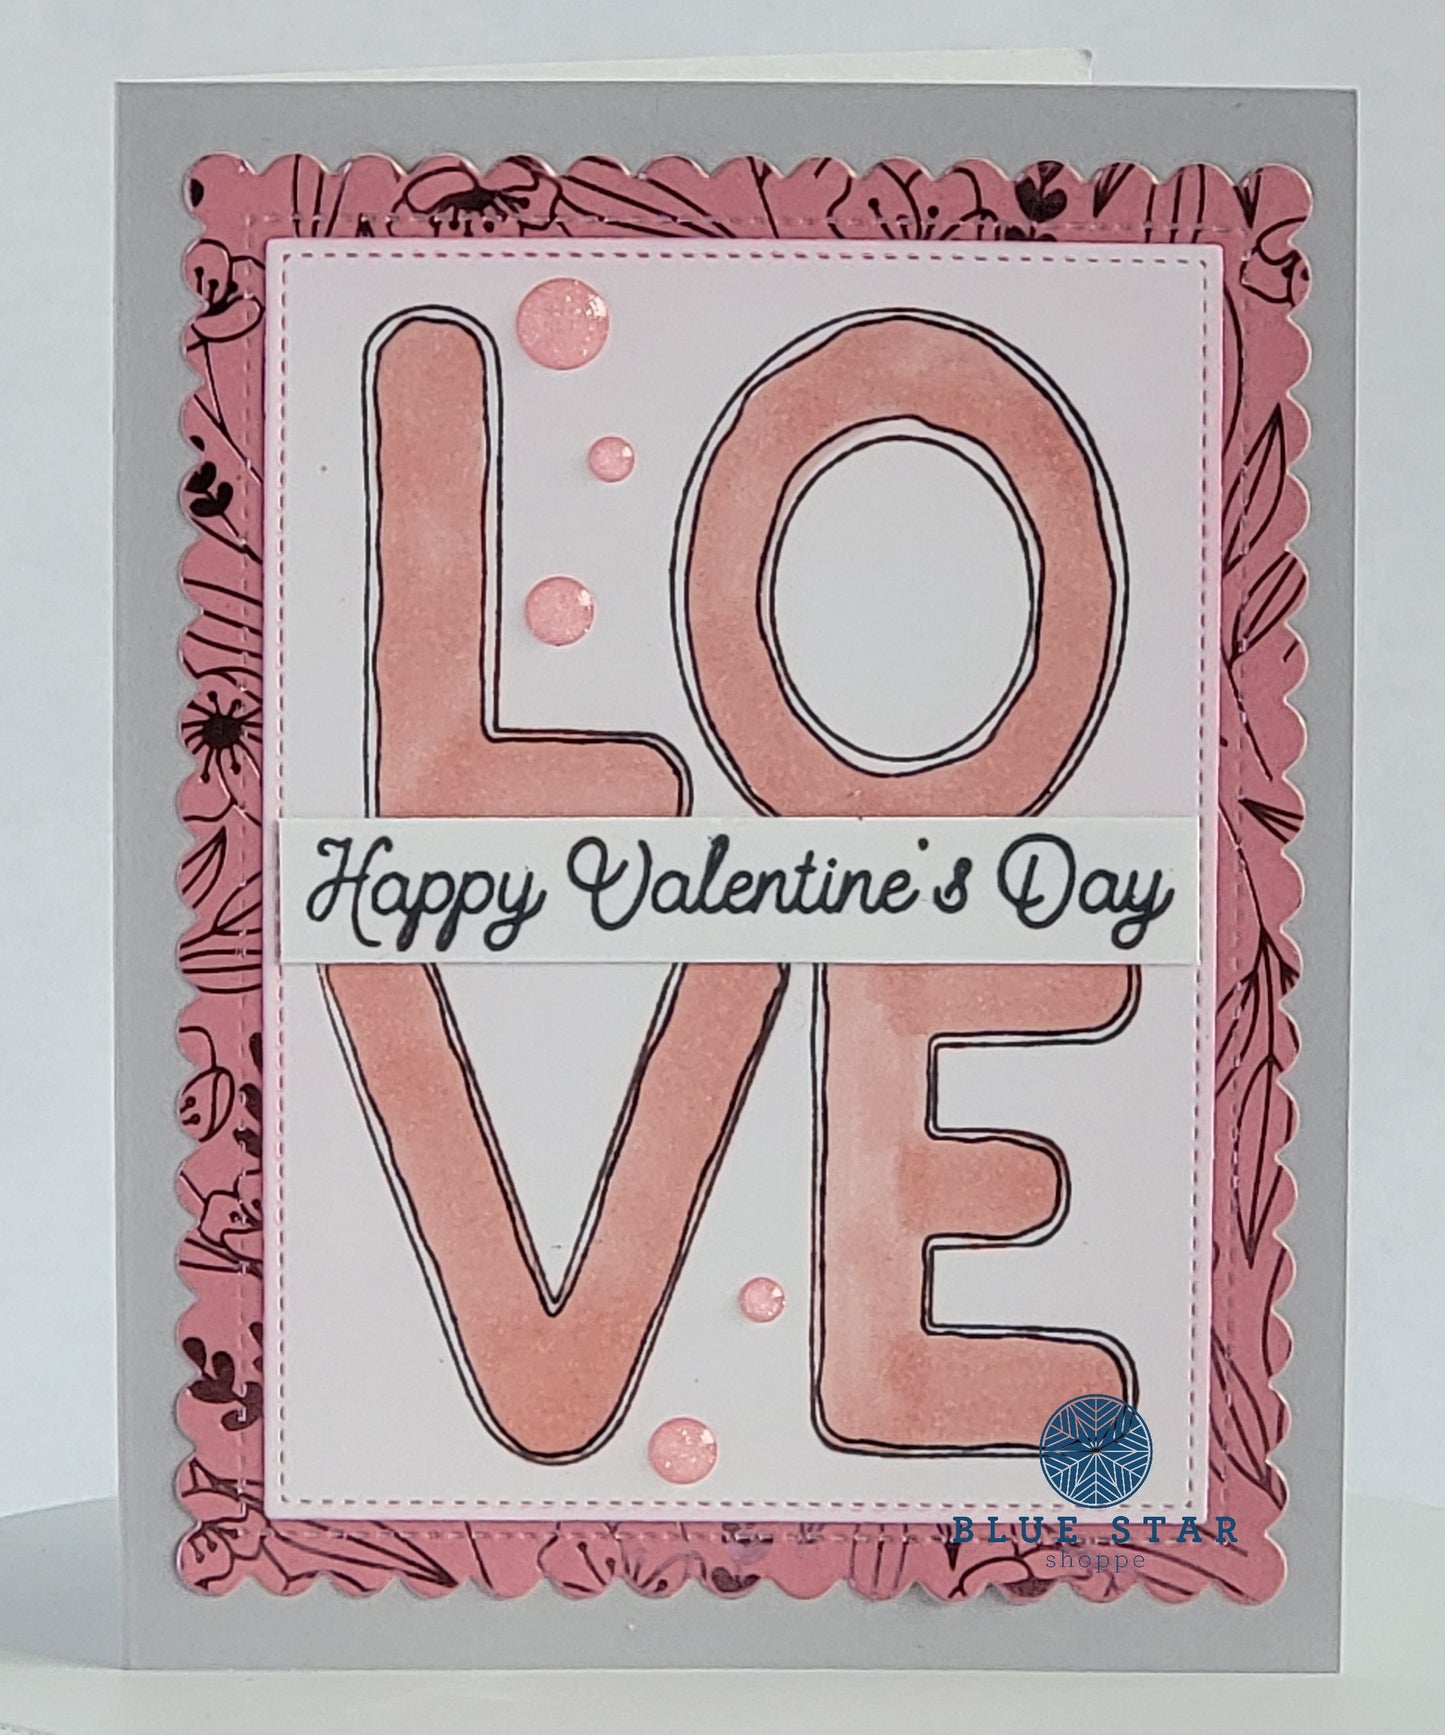 Happy Valentine's Day Stacked Love Greeting Card